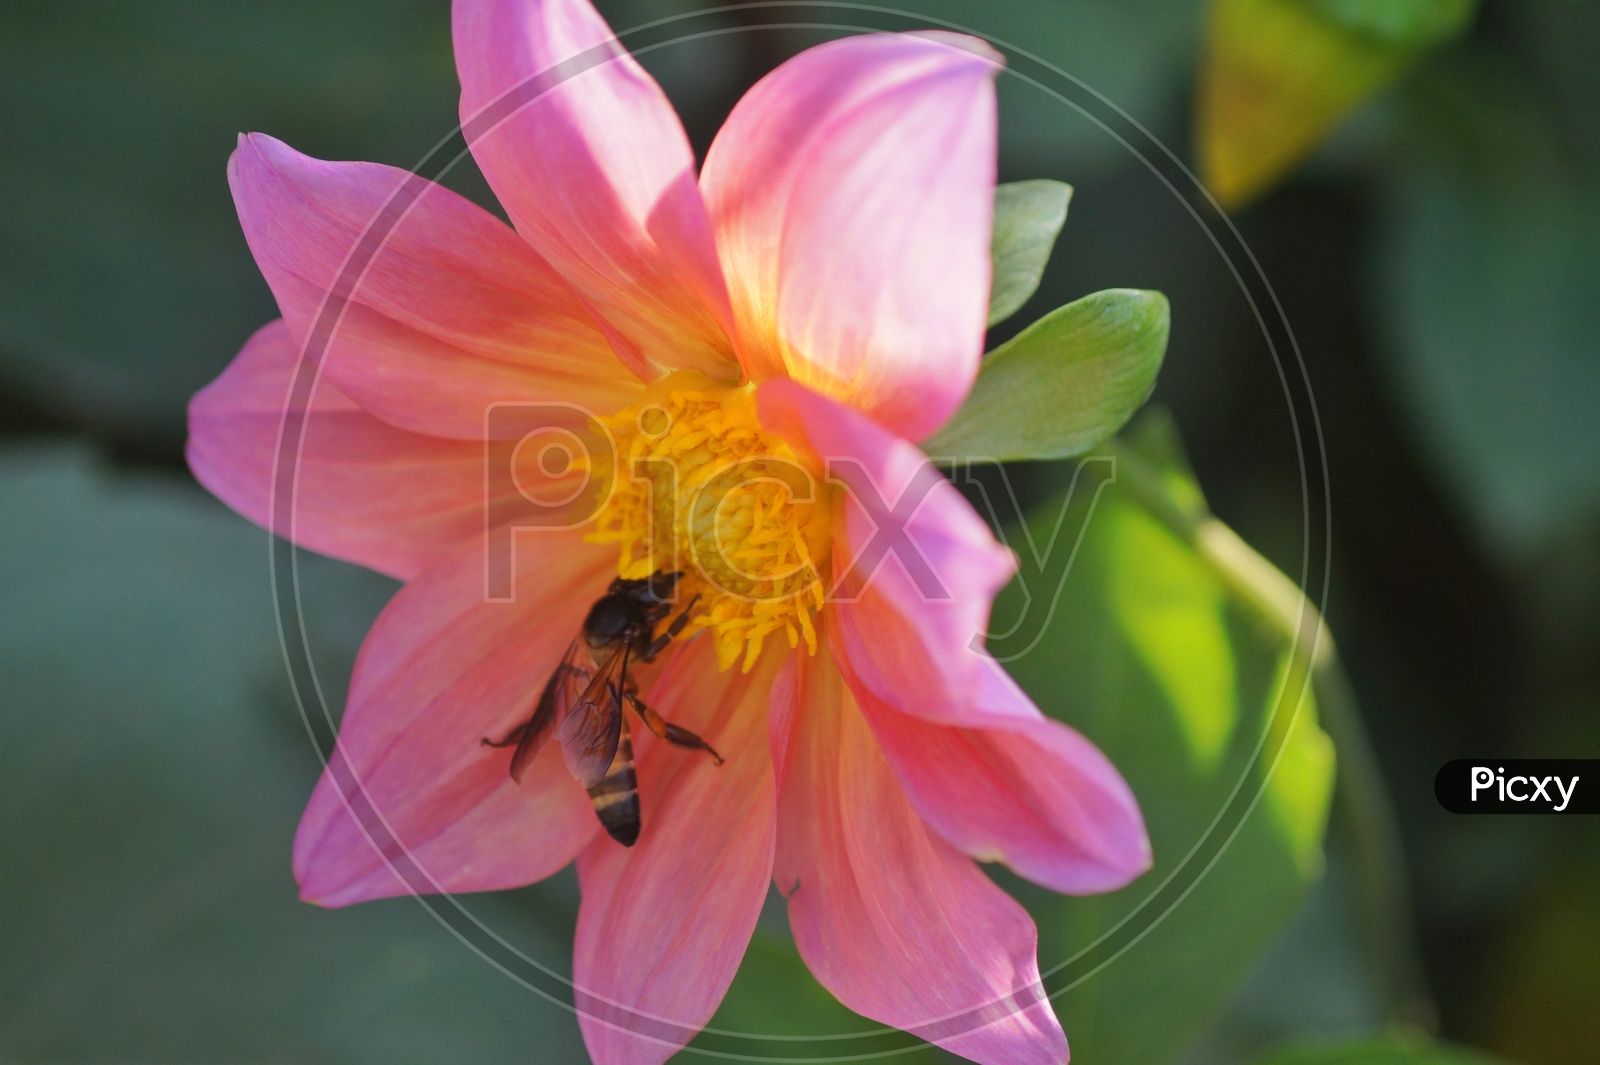 Flower and Insect